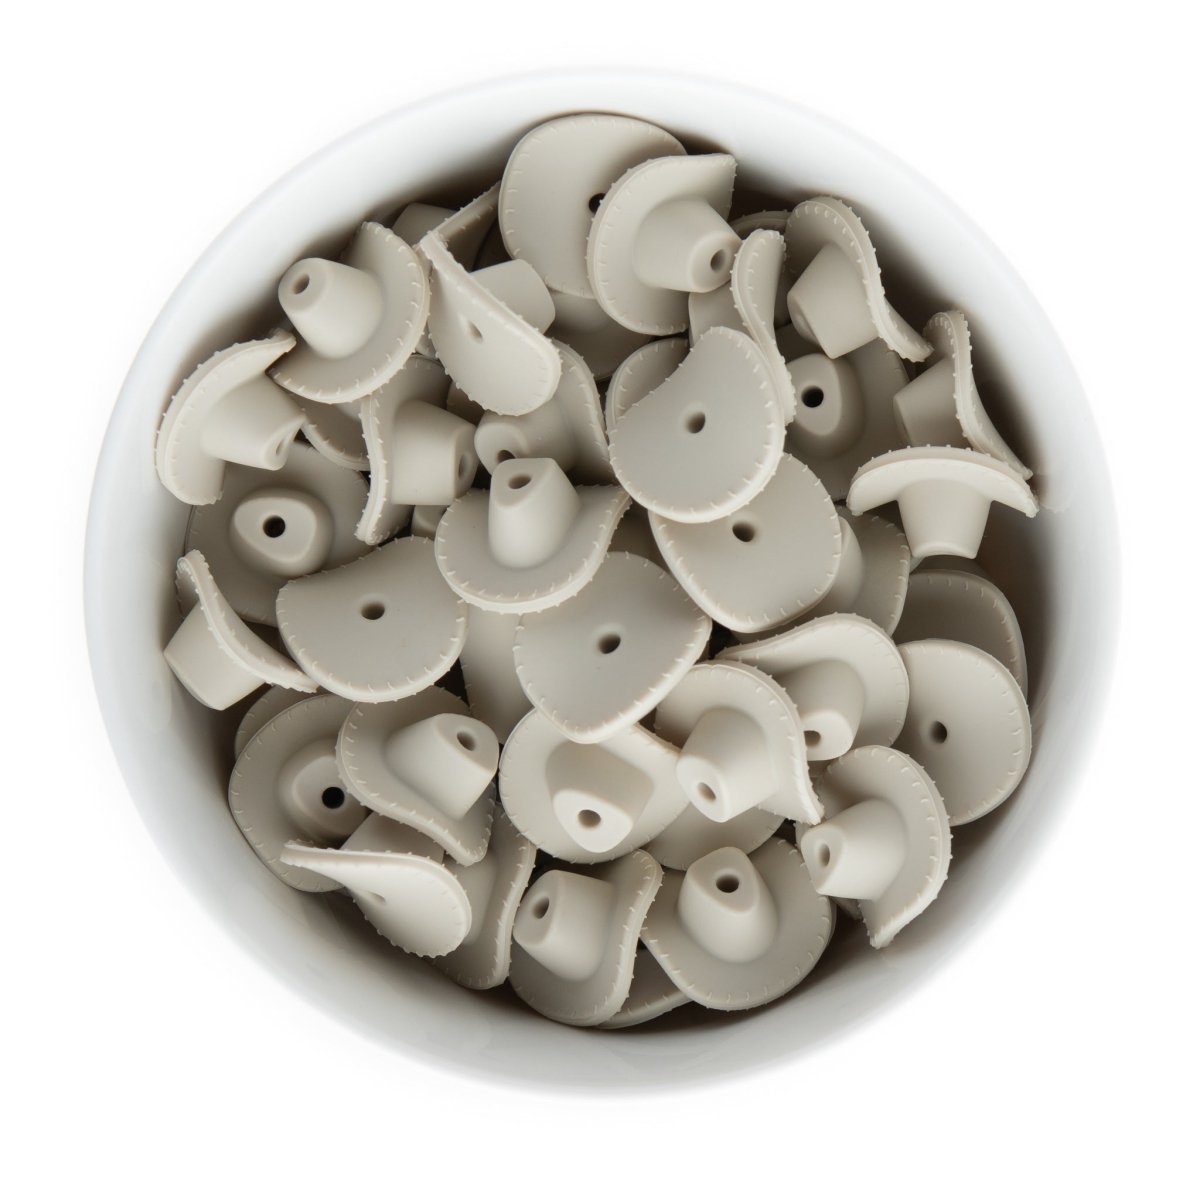 Silicone Focal Beads Cowboy Hats Wool from Cara & Co Craft Supply